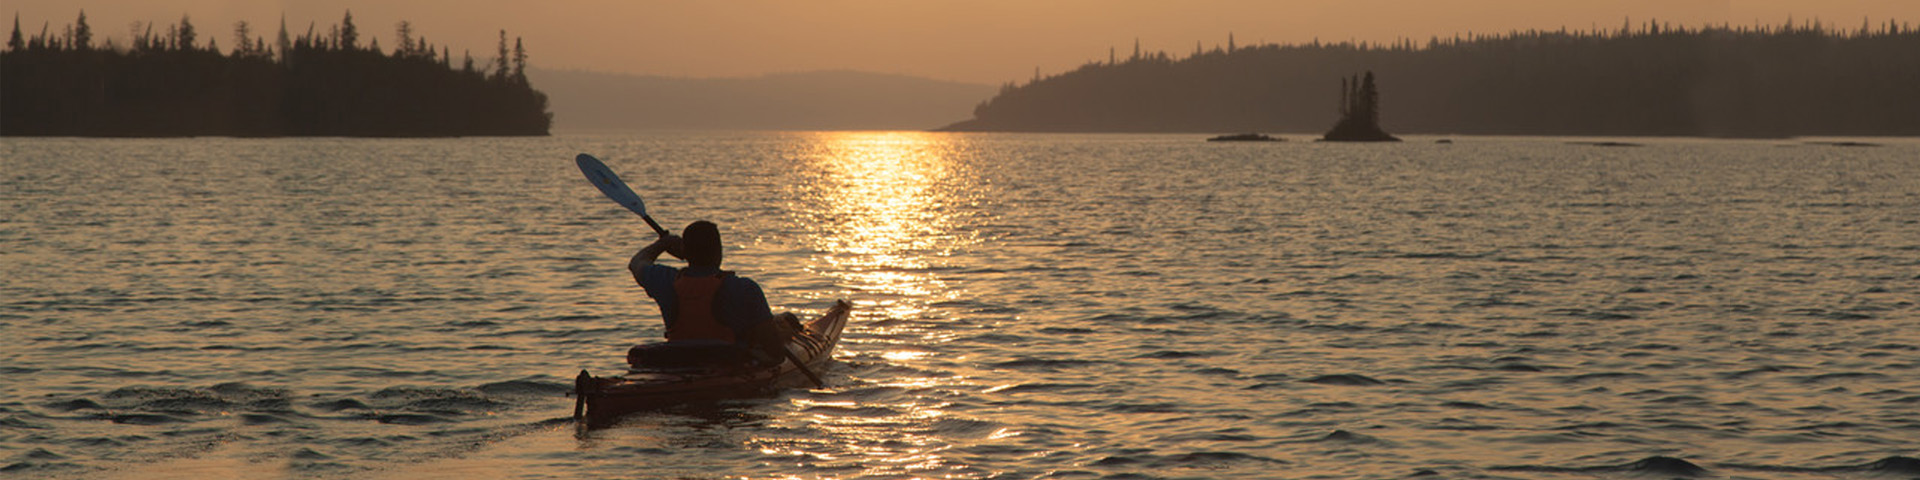 A person on a kayak during sunset on Lake Superior. 